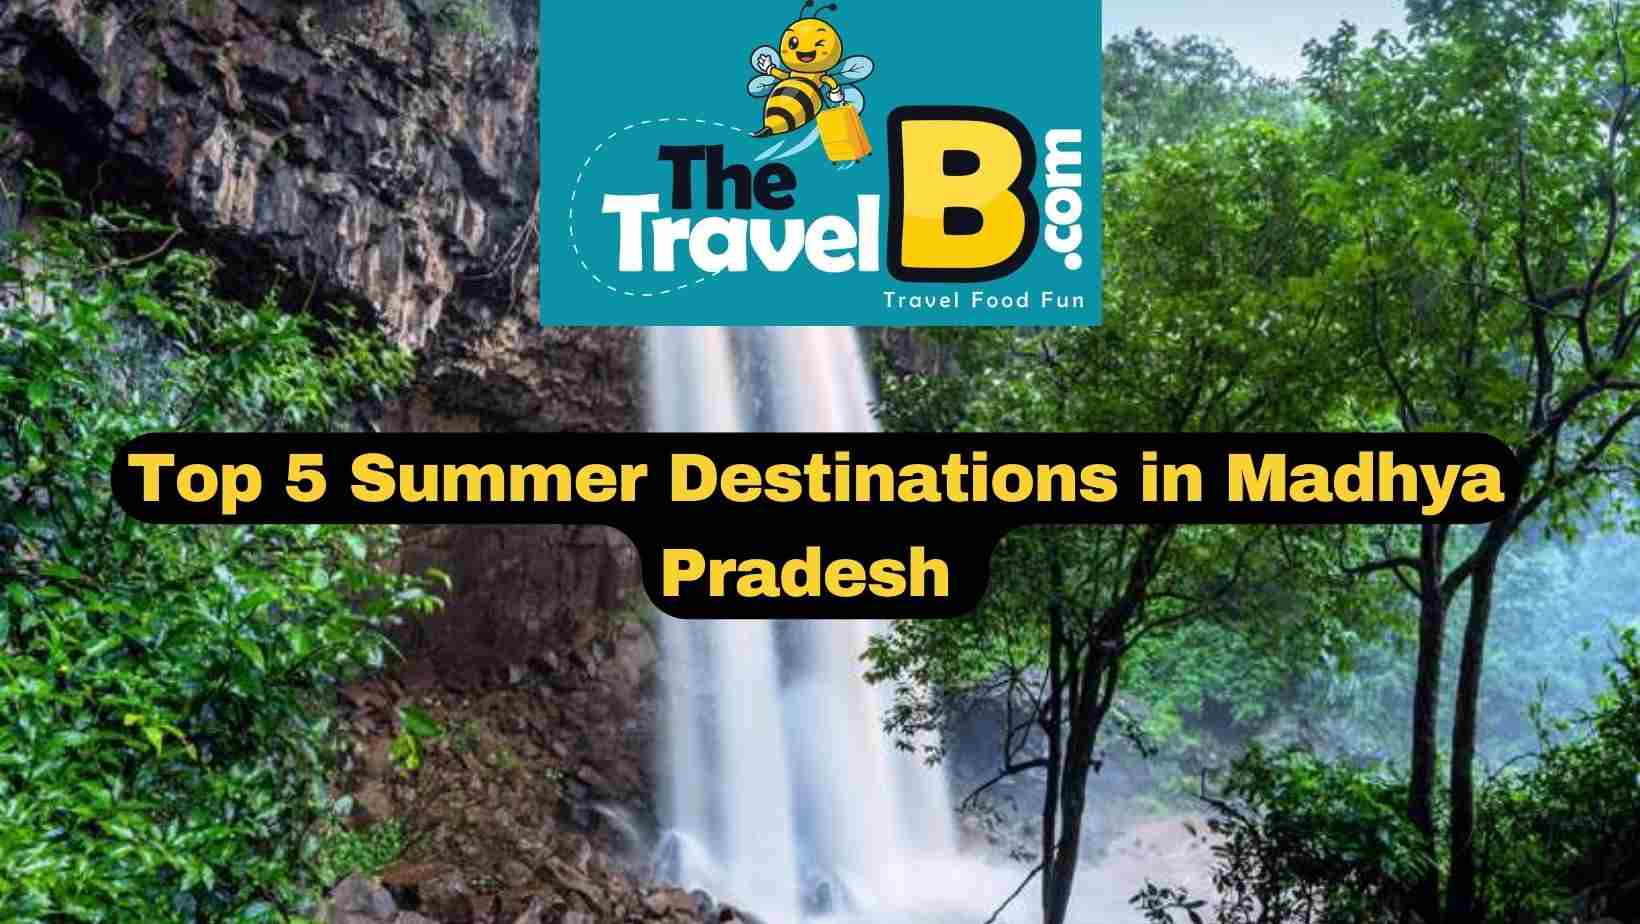 Must See places in Madhya Pradesh